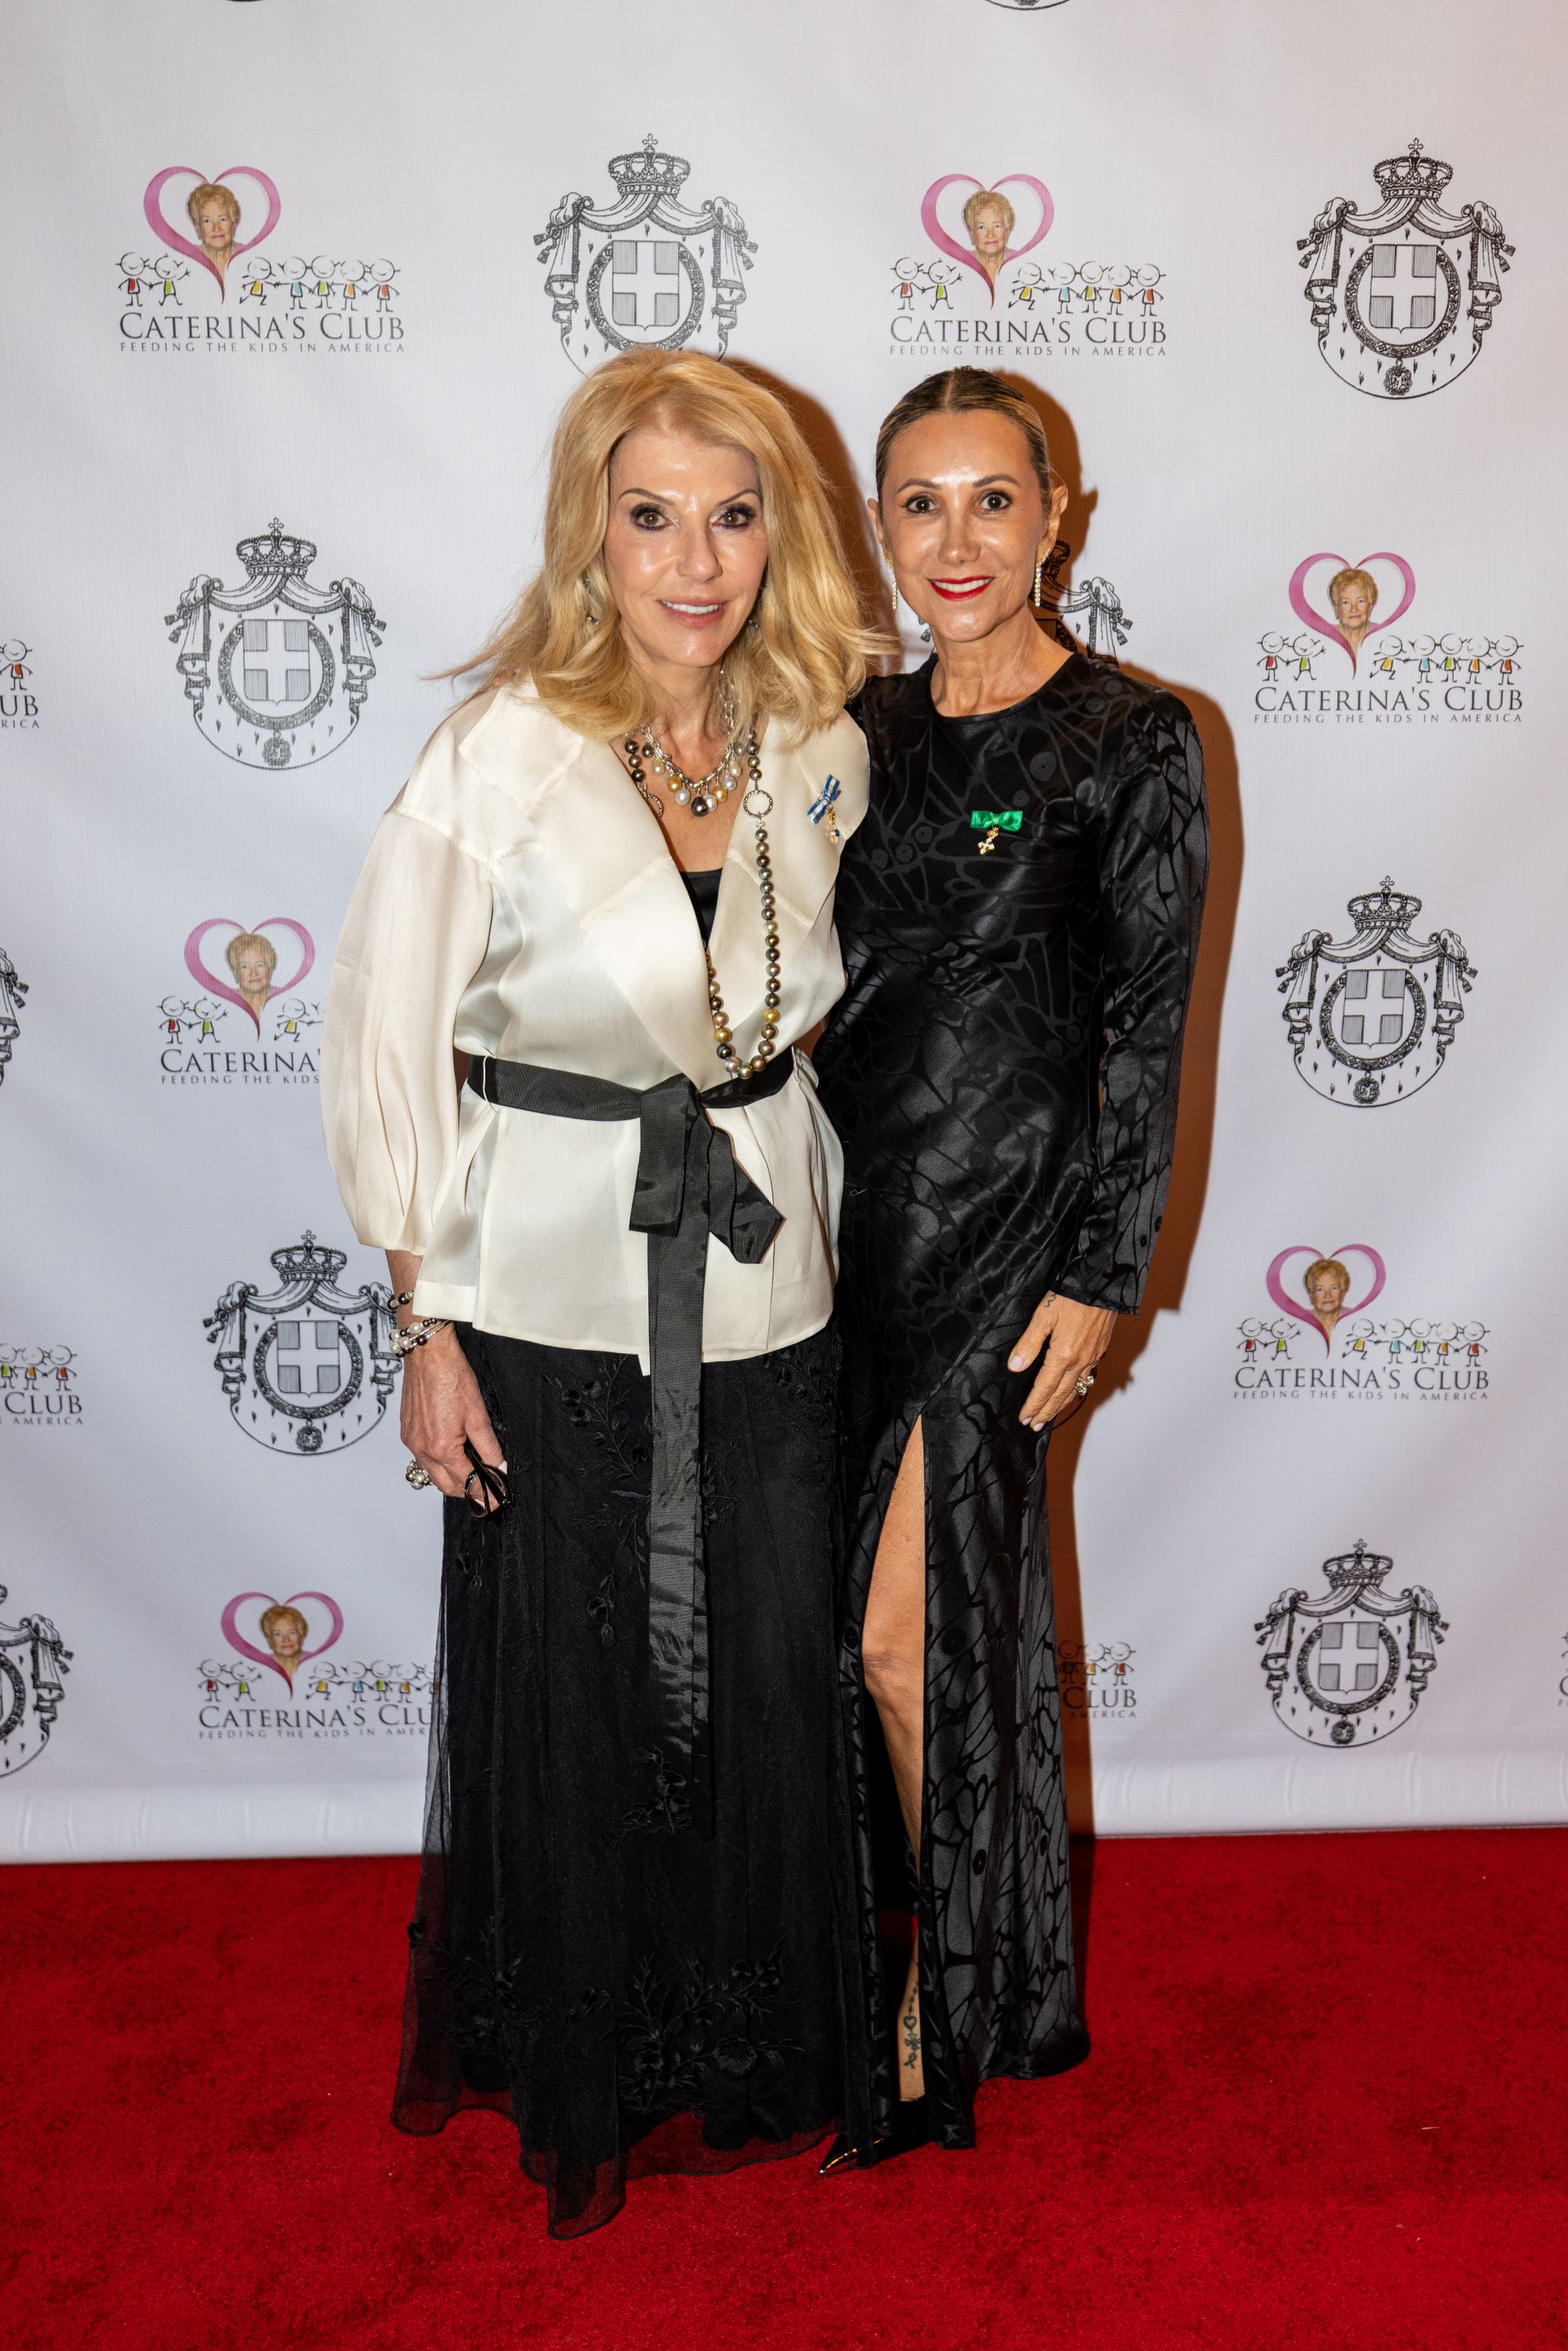 Event Grand Patron Vivian Cardia with Event Co-Chair Florentina McClory at the 5th Annual Notte di Savoia Los Angeles Gala Fundraiser for Caterina's Club, April 29, 2023